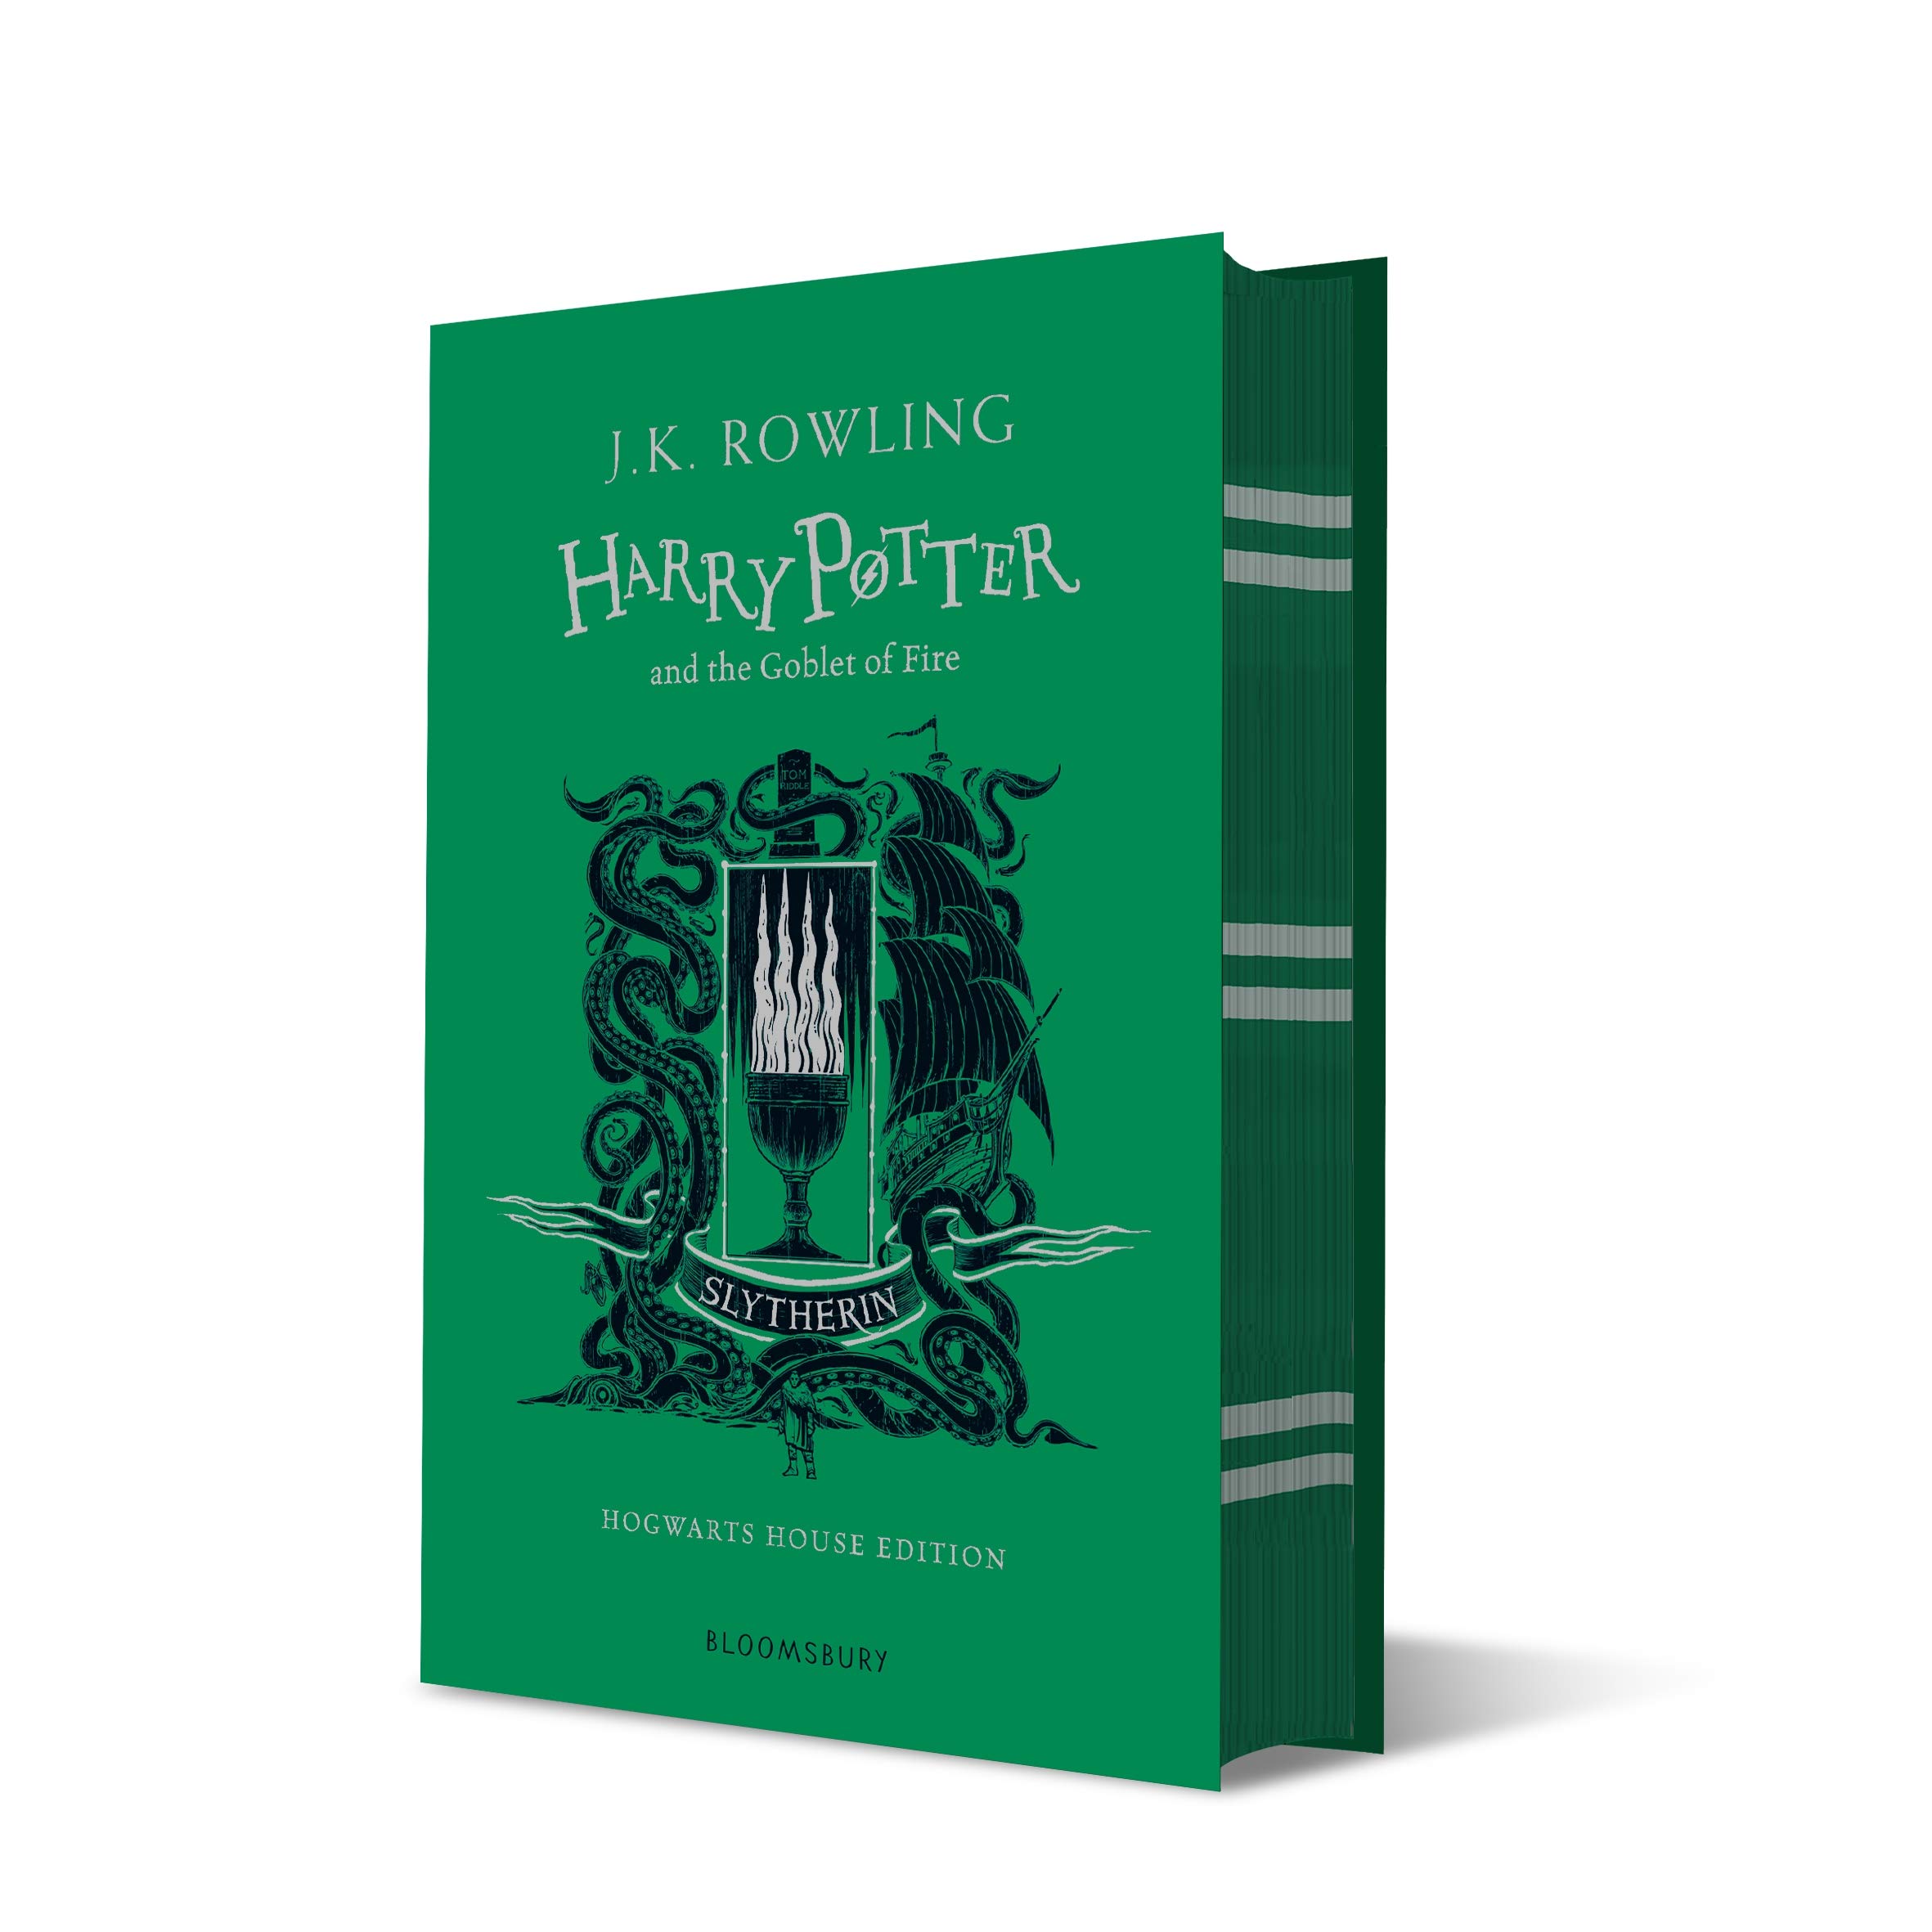 Rowling J.K. - Harry Potter and the Goblet of Fire - Slytherin Ed.